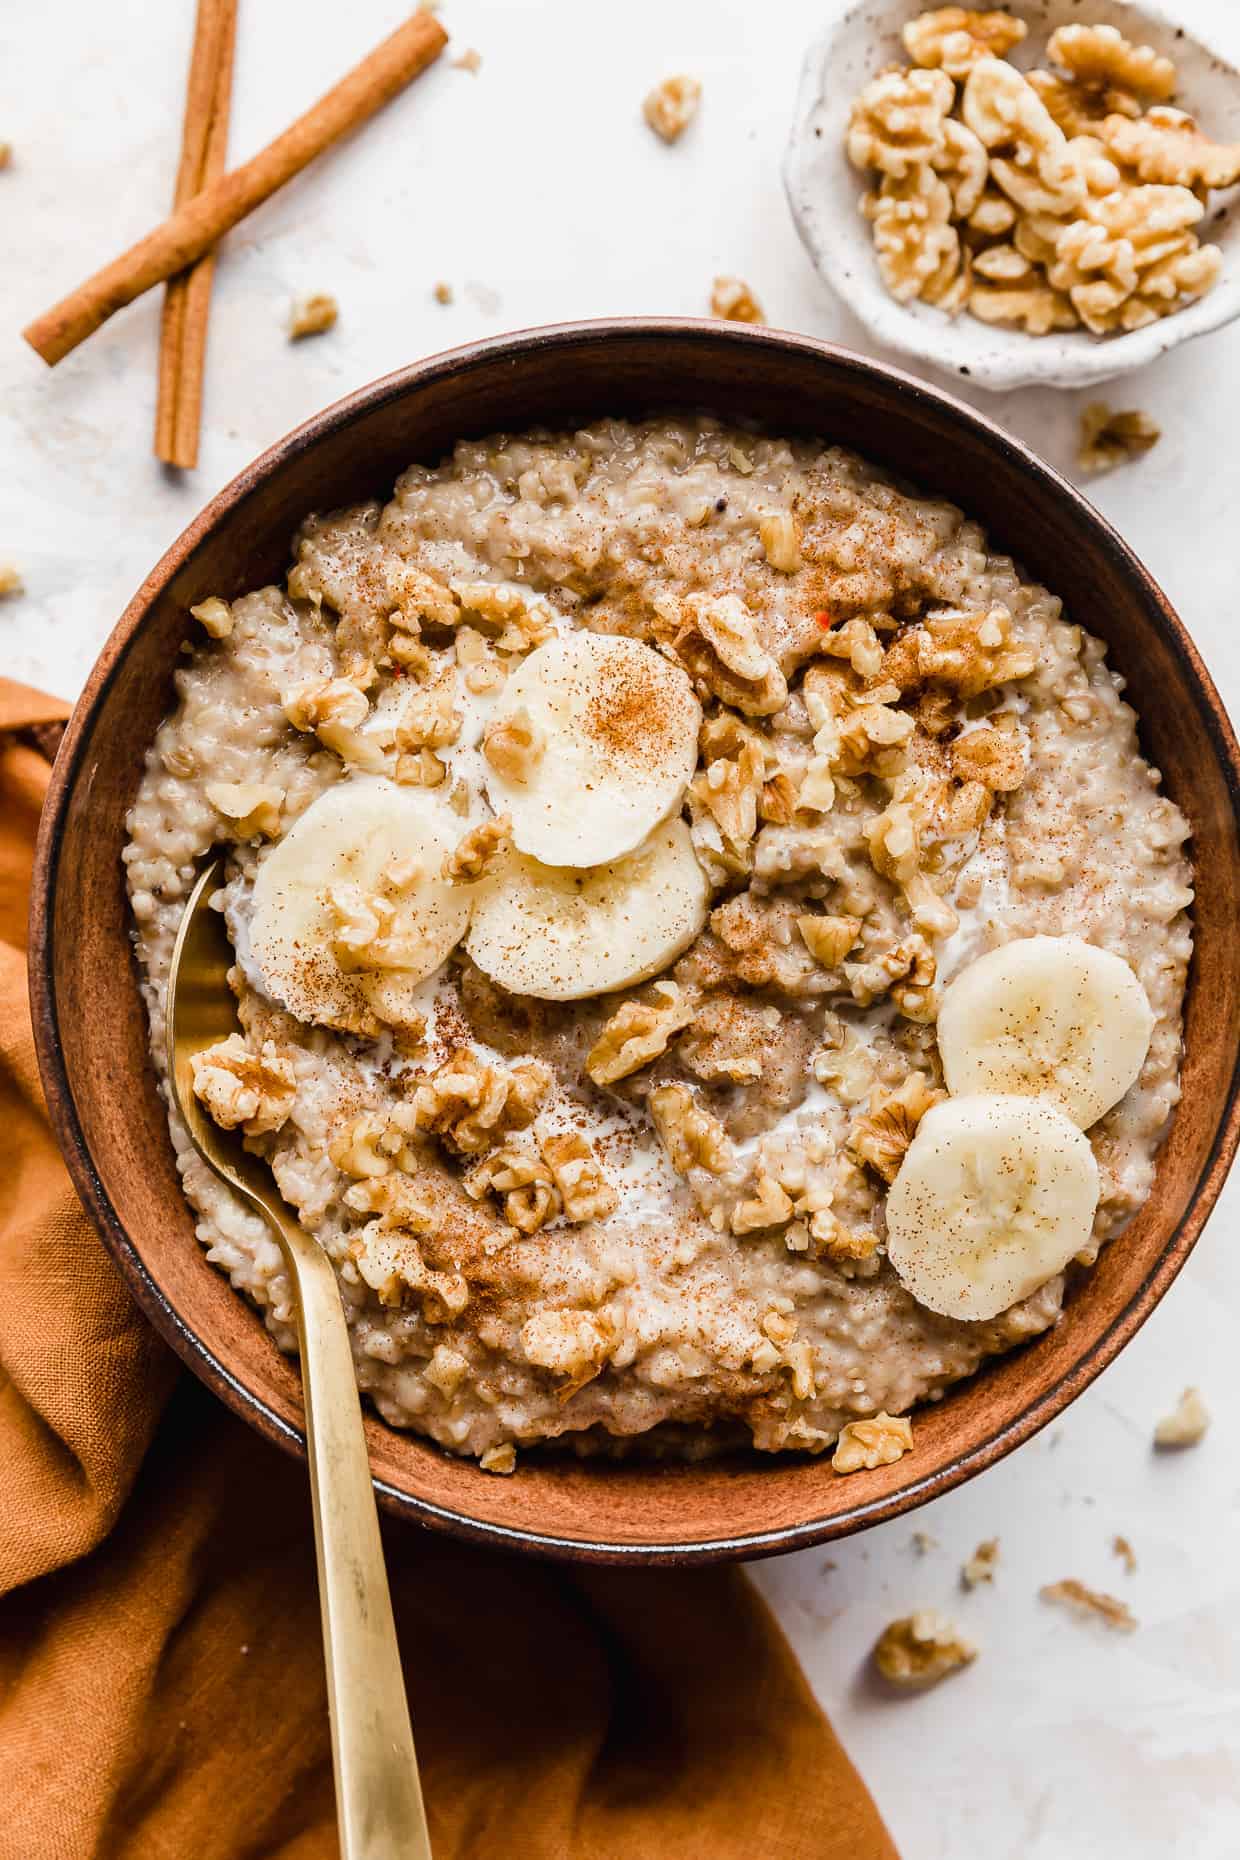 A brown bowl full of Banana Steel Cut Oats garnished with sliced bananas and nuts.